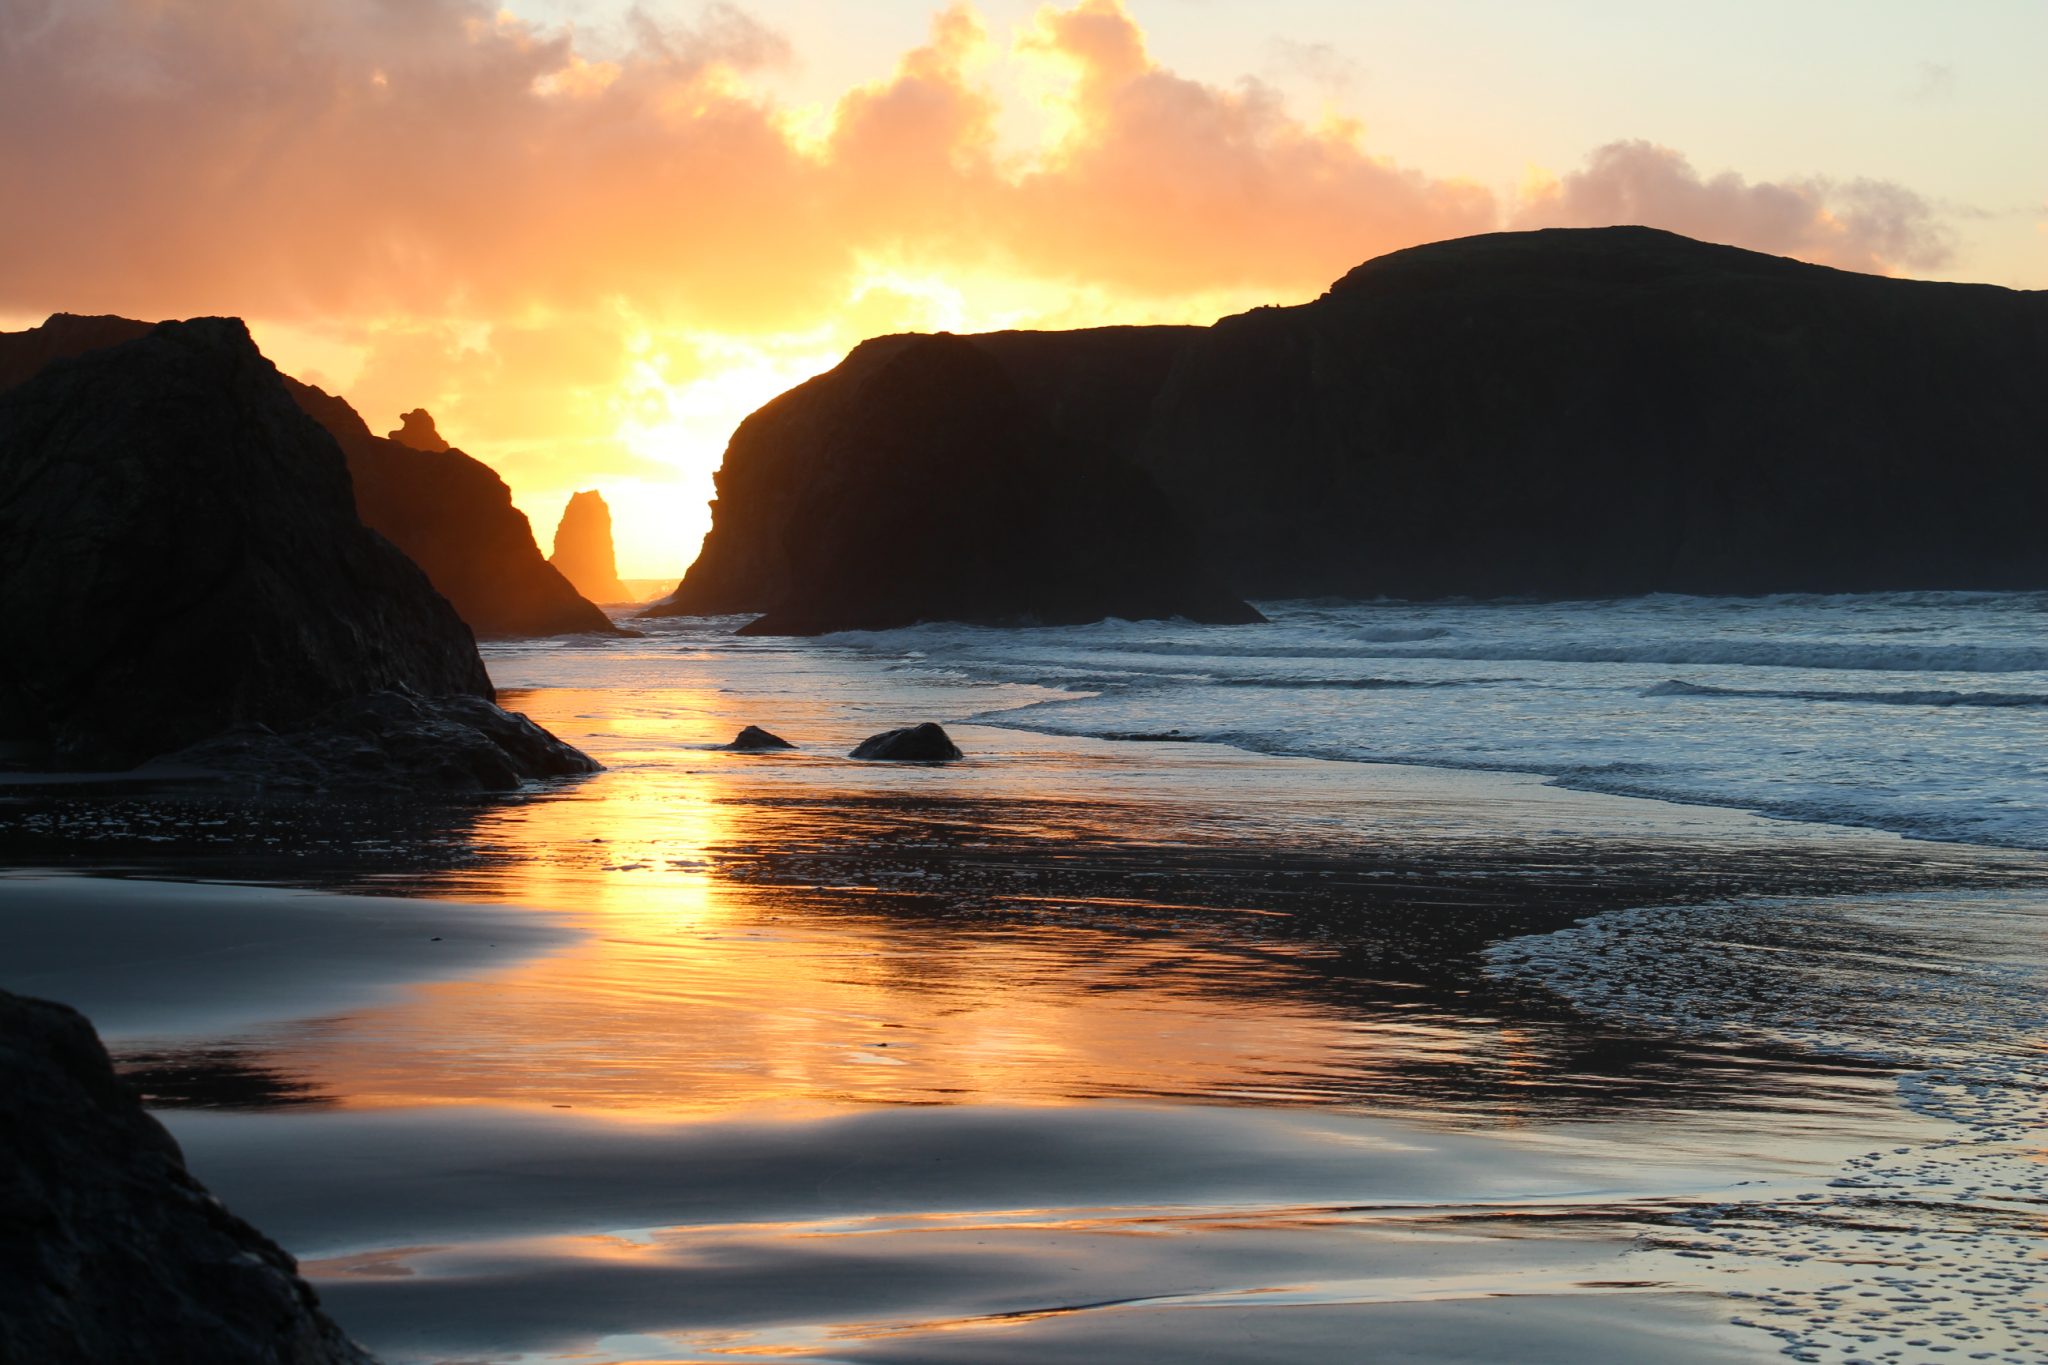 Sunset in Bandon by the Sea, Oregon seen during a writers' retreat. Photo by Sue Langston.